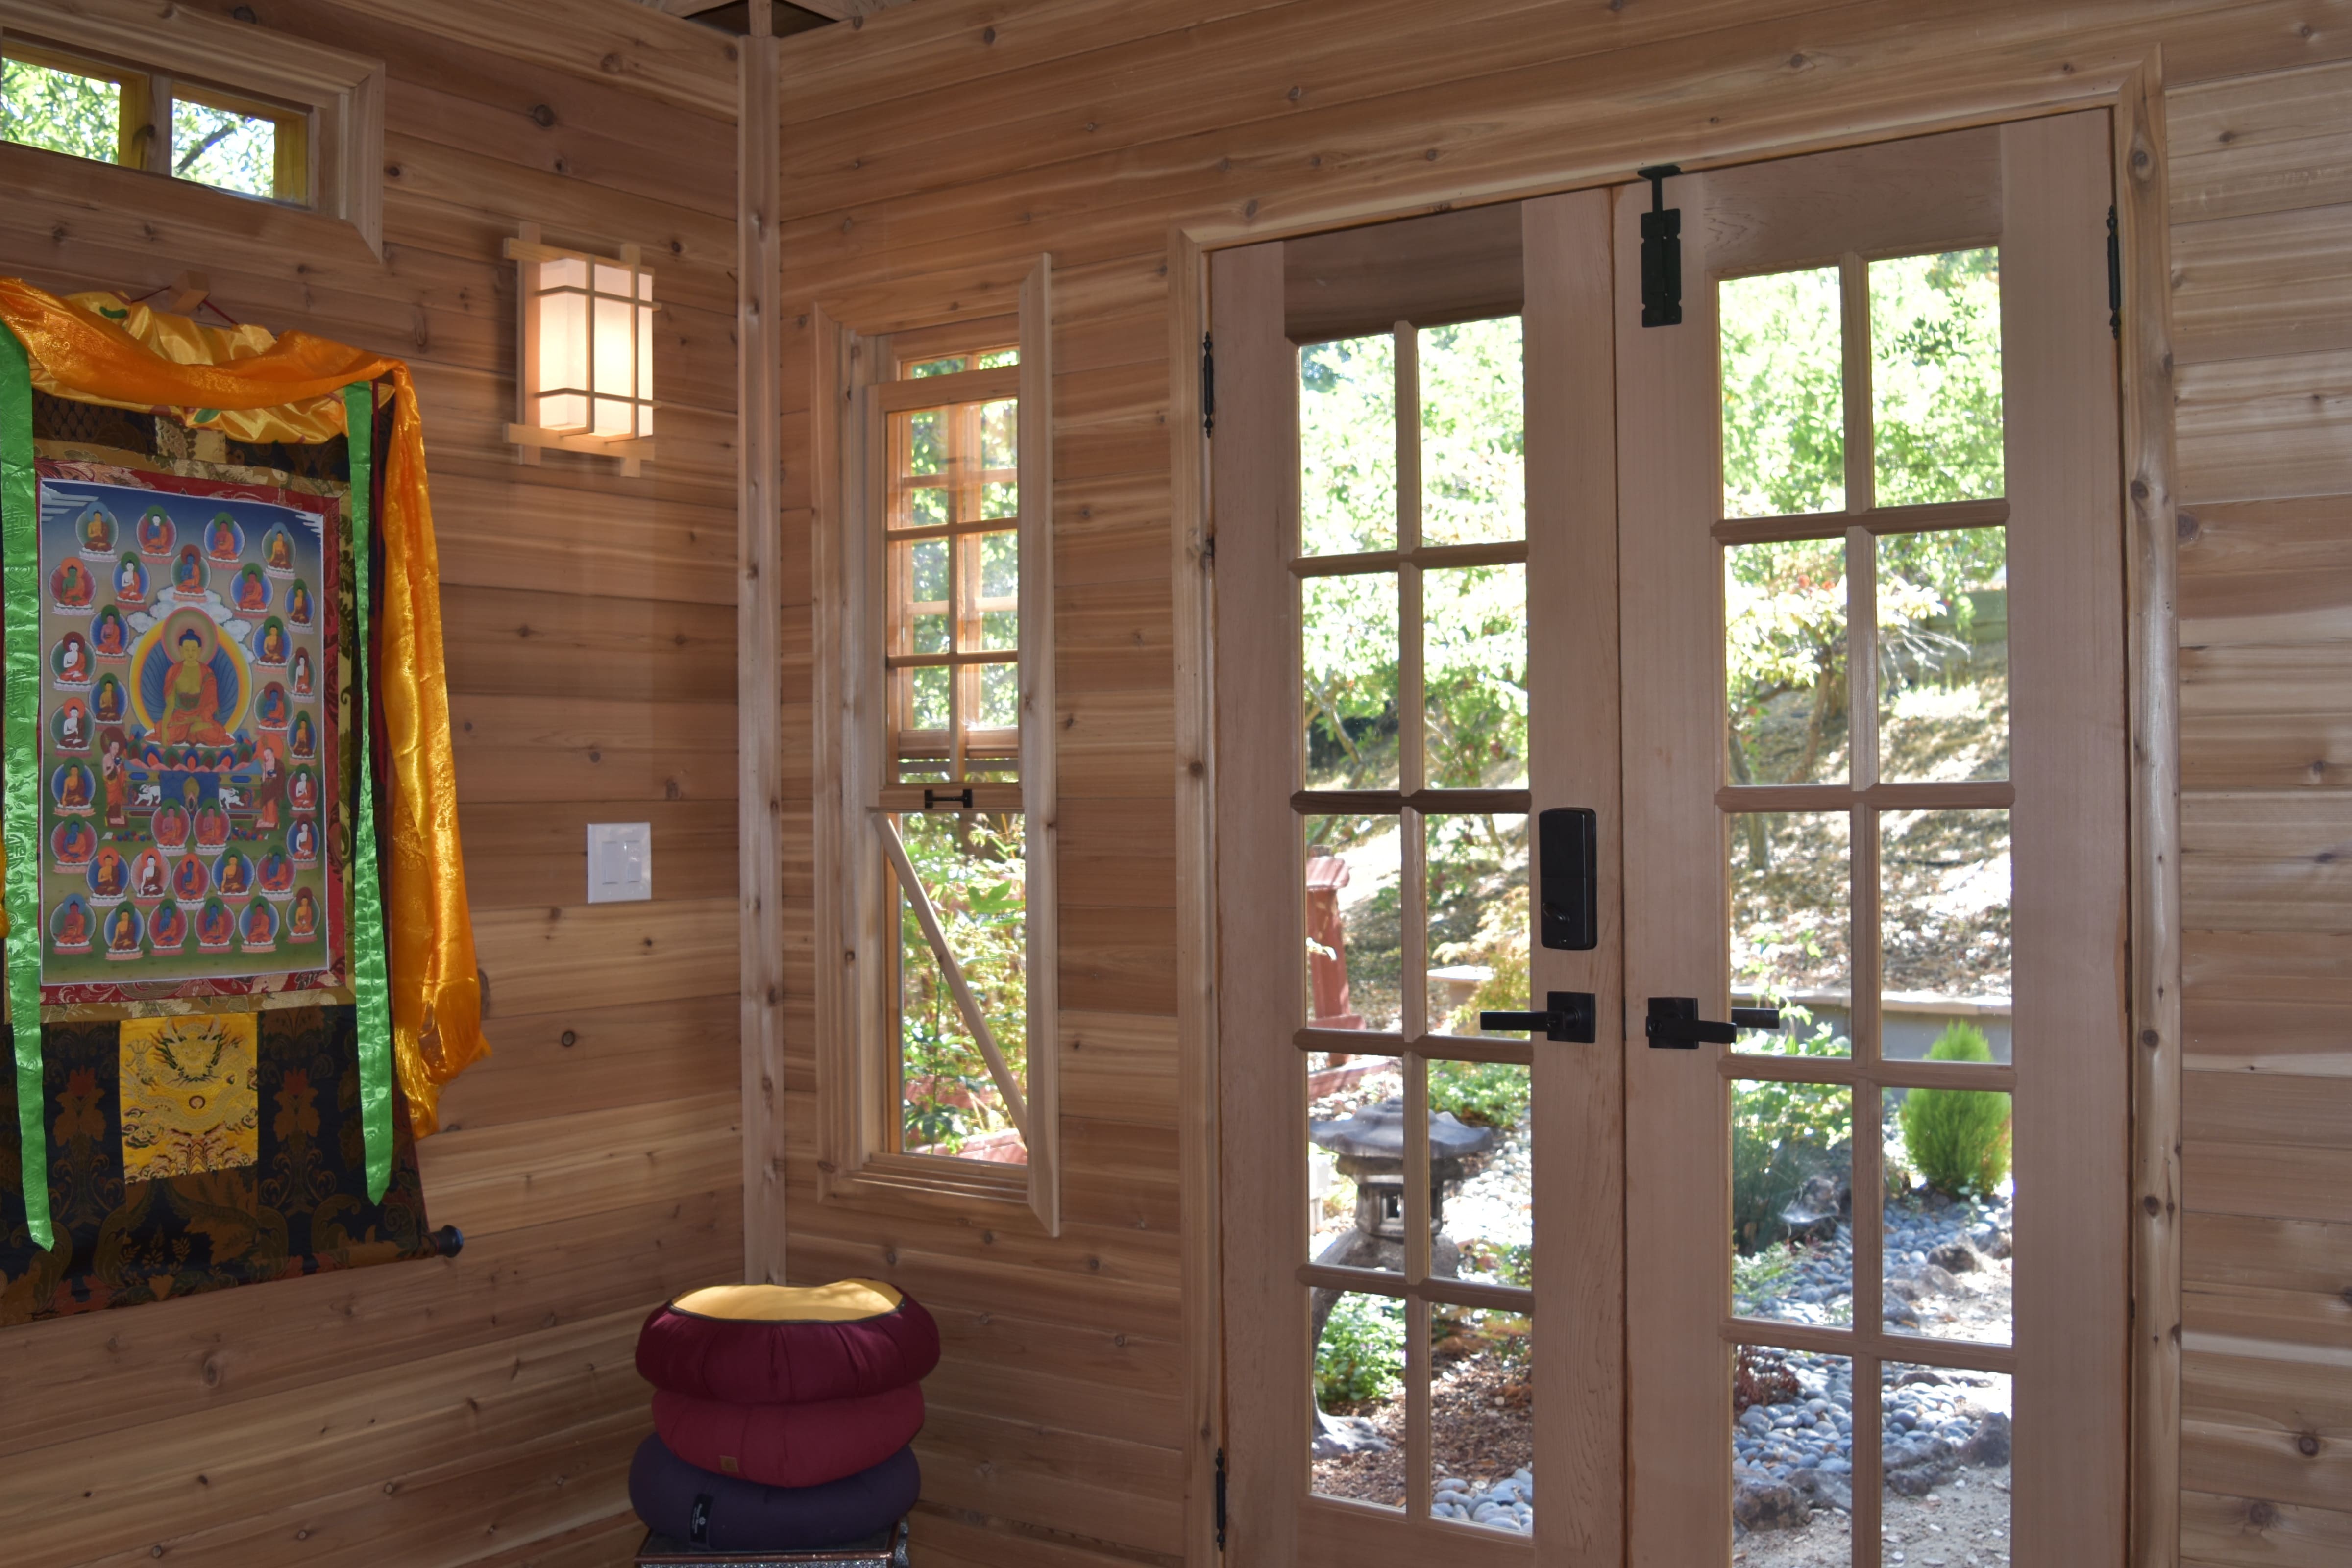 Interior view of 11’ x 11' Melbourne Garden Shed located in Saratoga, California – Summerwood Pr